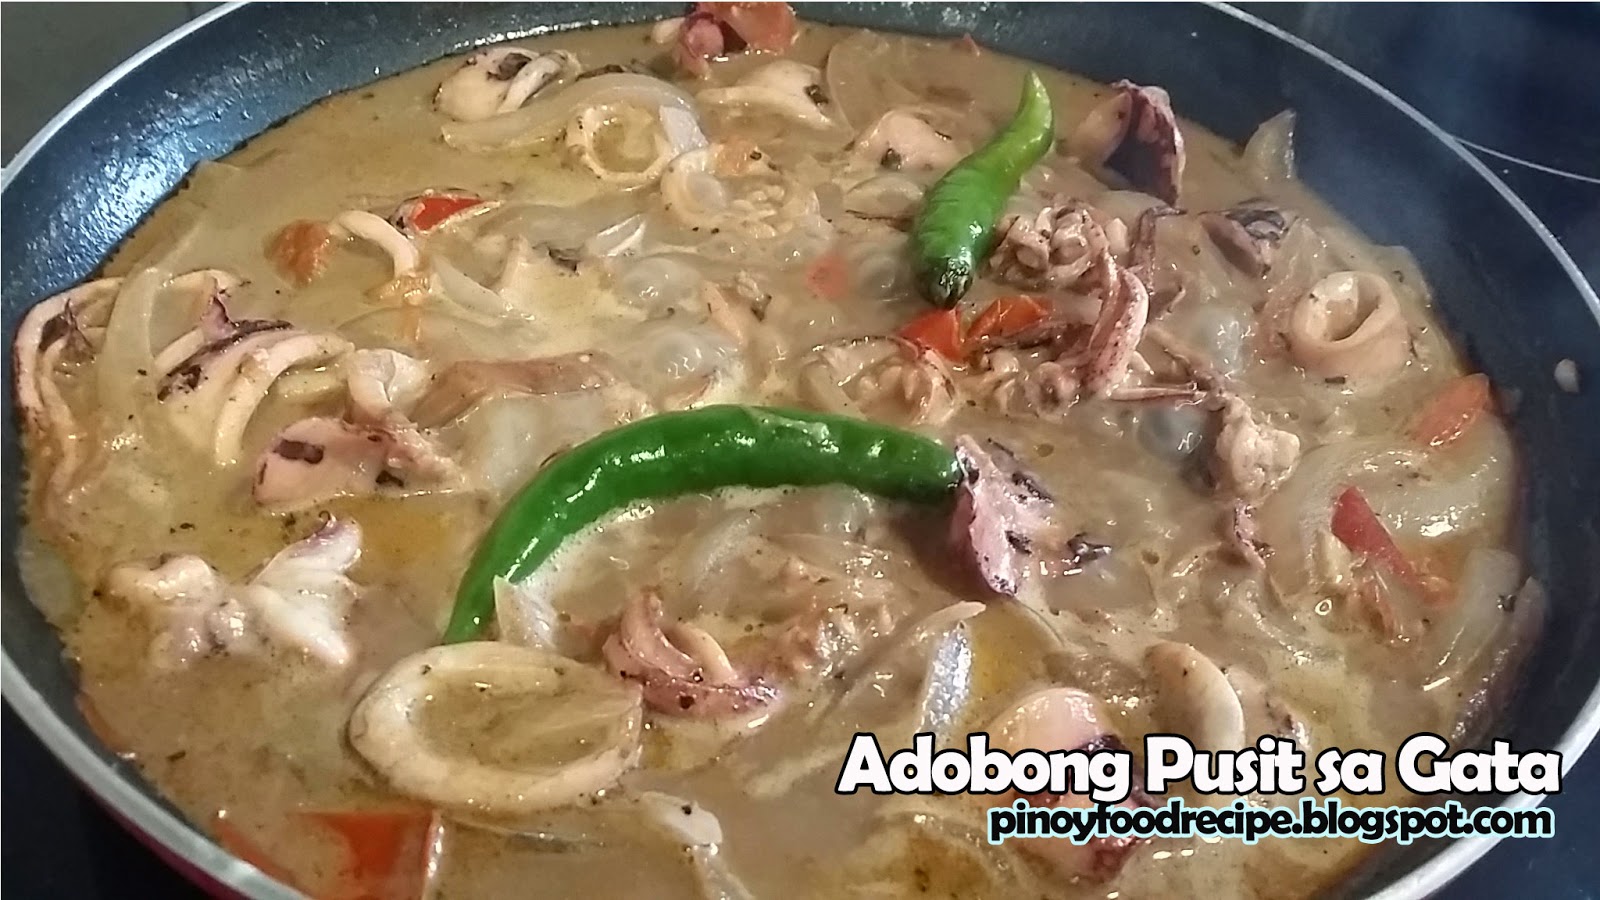 constante Mil millones Instruir Pinoy Food Recipes: Adobong Pusit sa Gata (Squid Adobo with Coconut Cream)